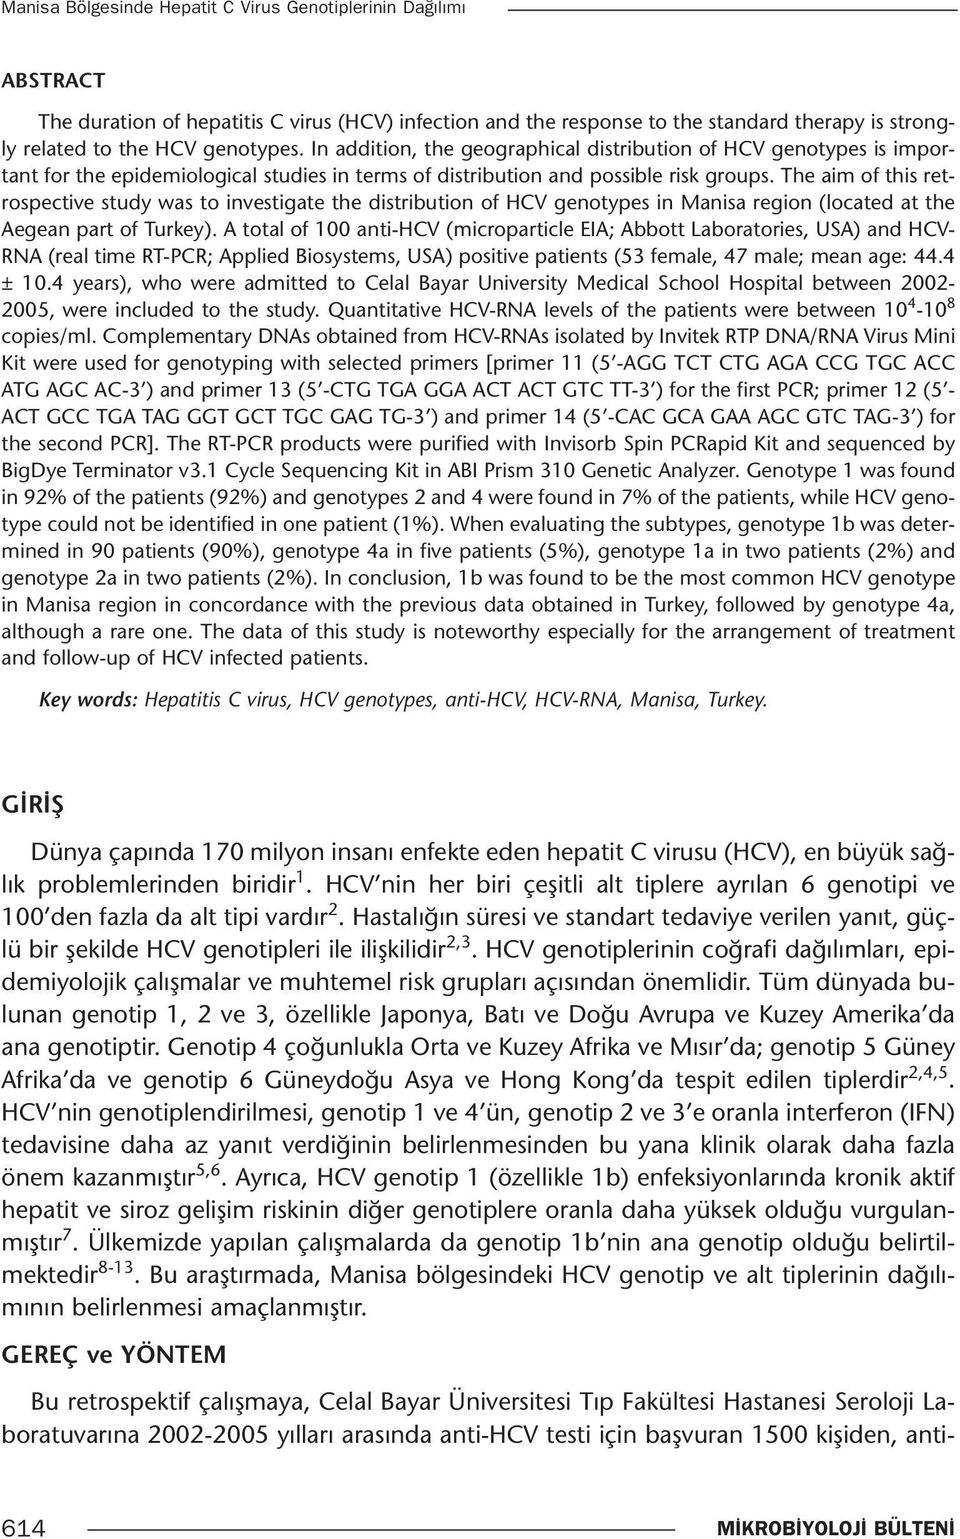 The aim of this retrospective study was to investigate the distribution of HCV genotypes in Manisa region (located at the Aegean part of Turkey).